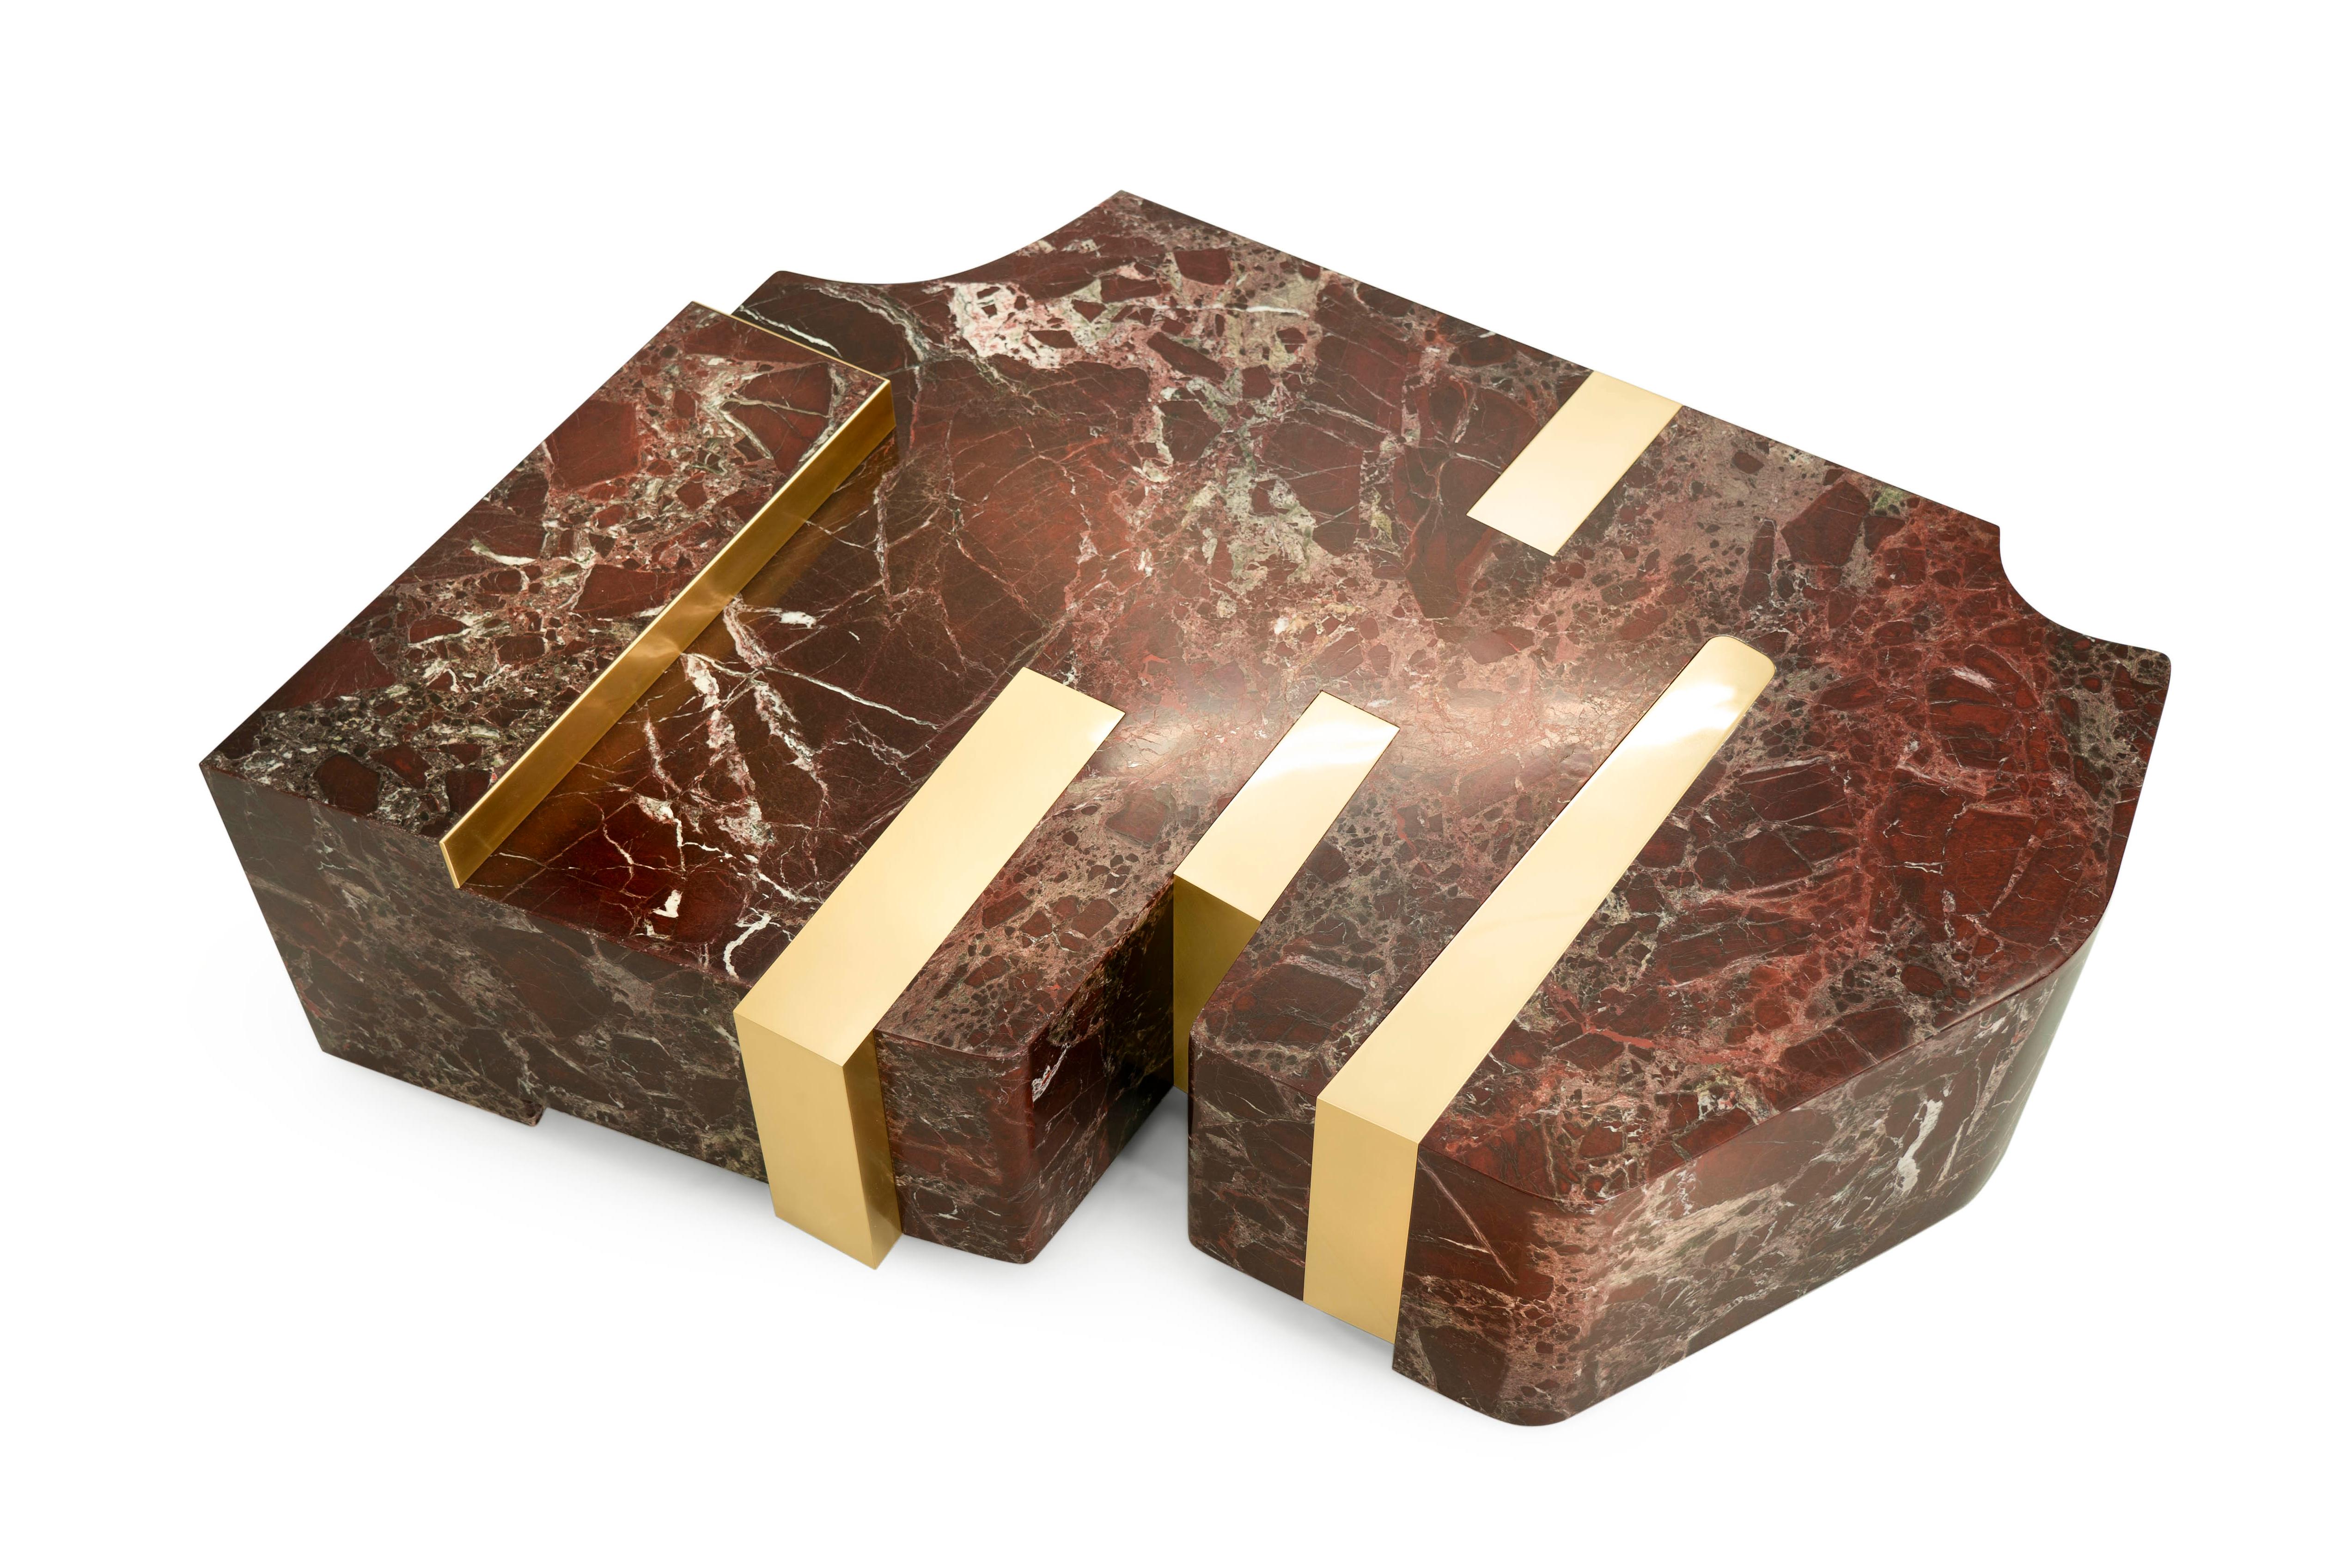 REY - 21st century European unique modern luxury center low table in red marble and brass.

If the truth be told, REY table is named after our newest and unforeseen team member, a Czechoslovakian wolfdog named Reya. There appeared an immediate